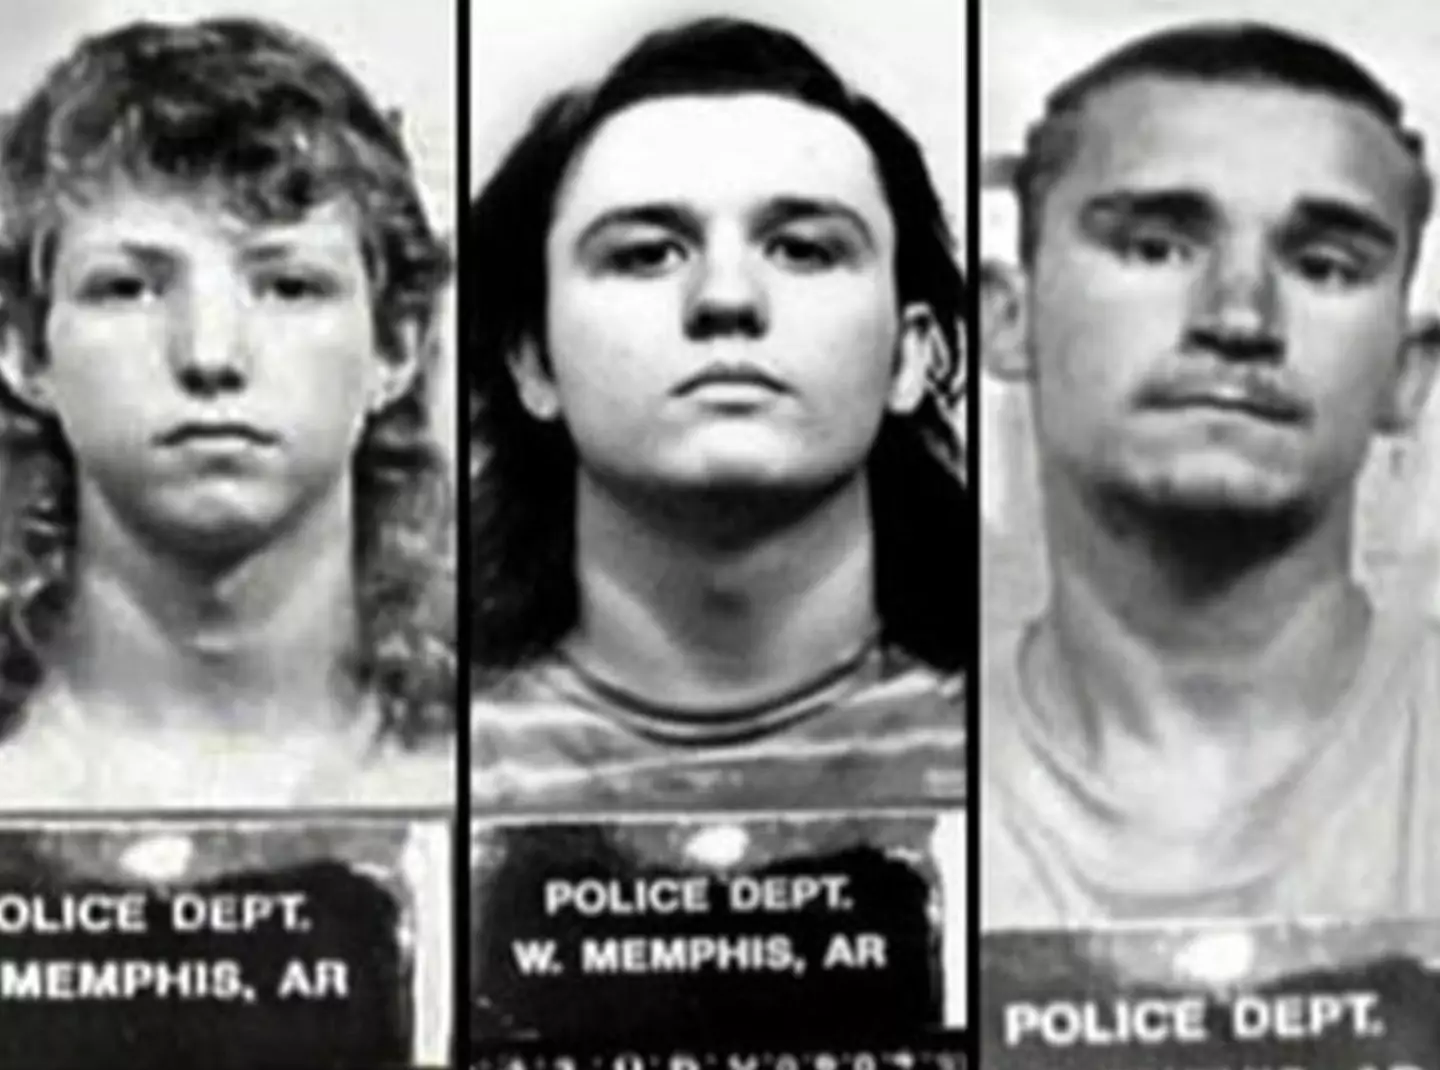 Jessie Misskelley, Jr., Jason Baldwin and Damien Echols were wrongly convicted of killing three young boys.